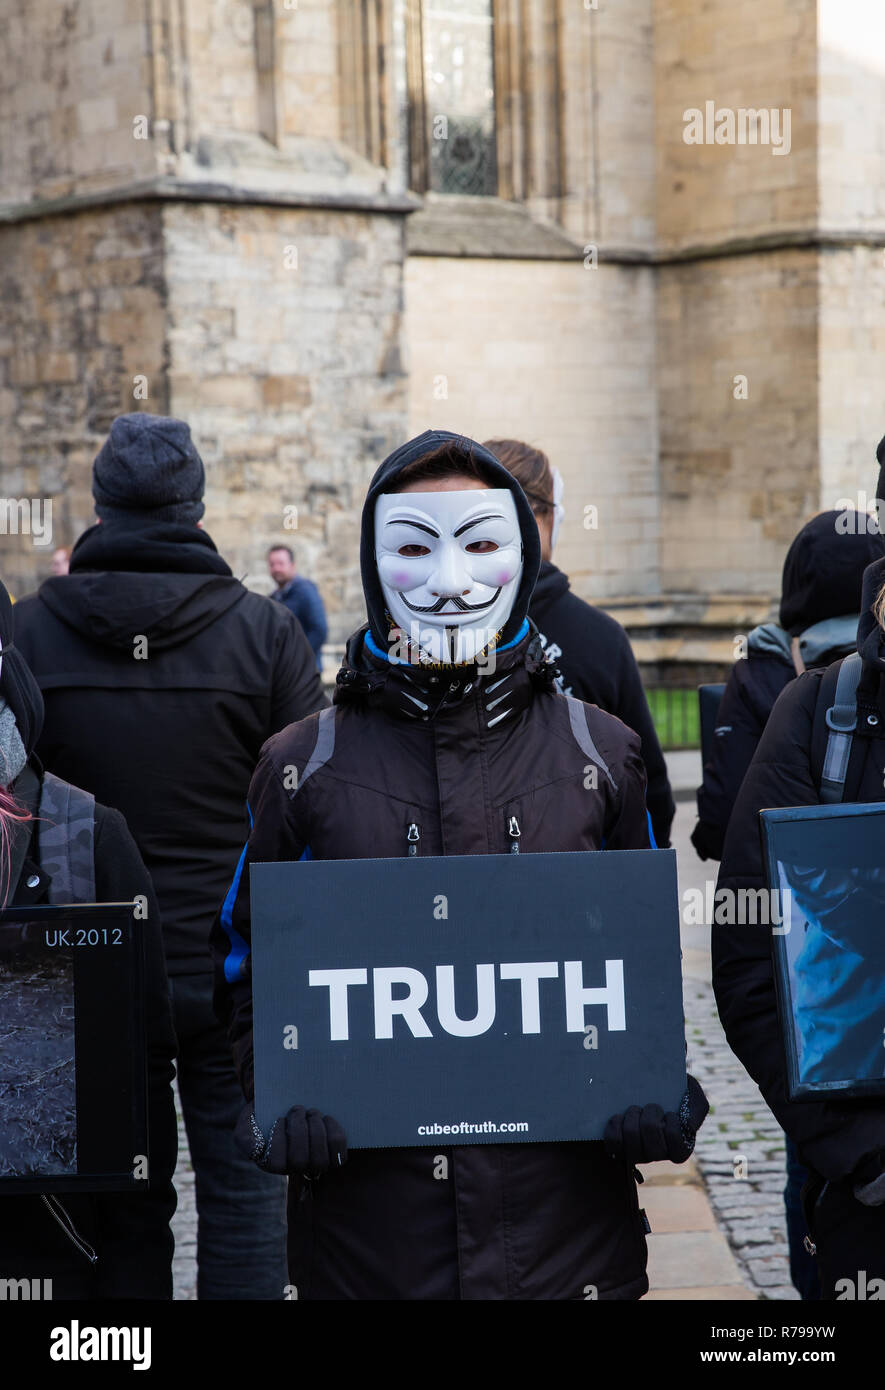 YORK, UK - DECEMBER 8, 2018.  Members of the Cube of Truth Vegan protest group in Guy Fawks masks and protesting about cruelty to animals. Stock Photo